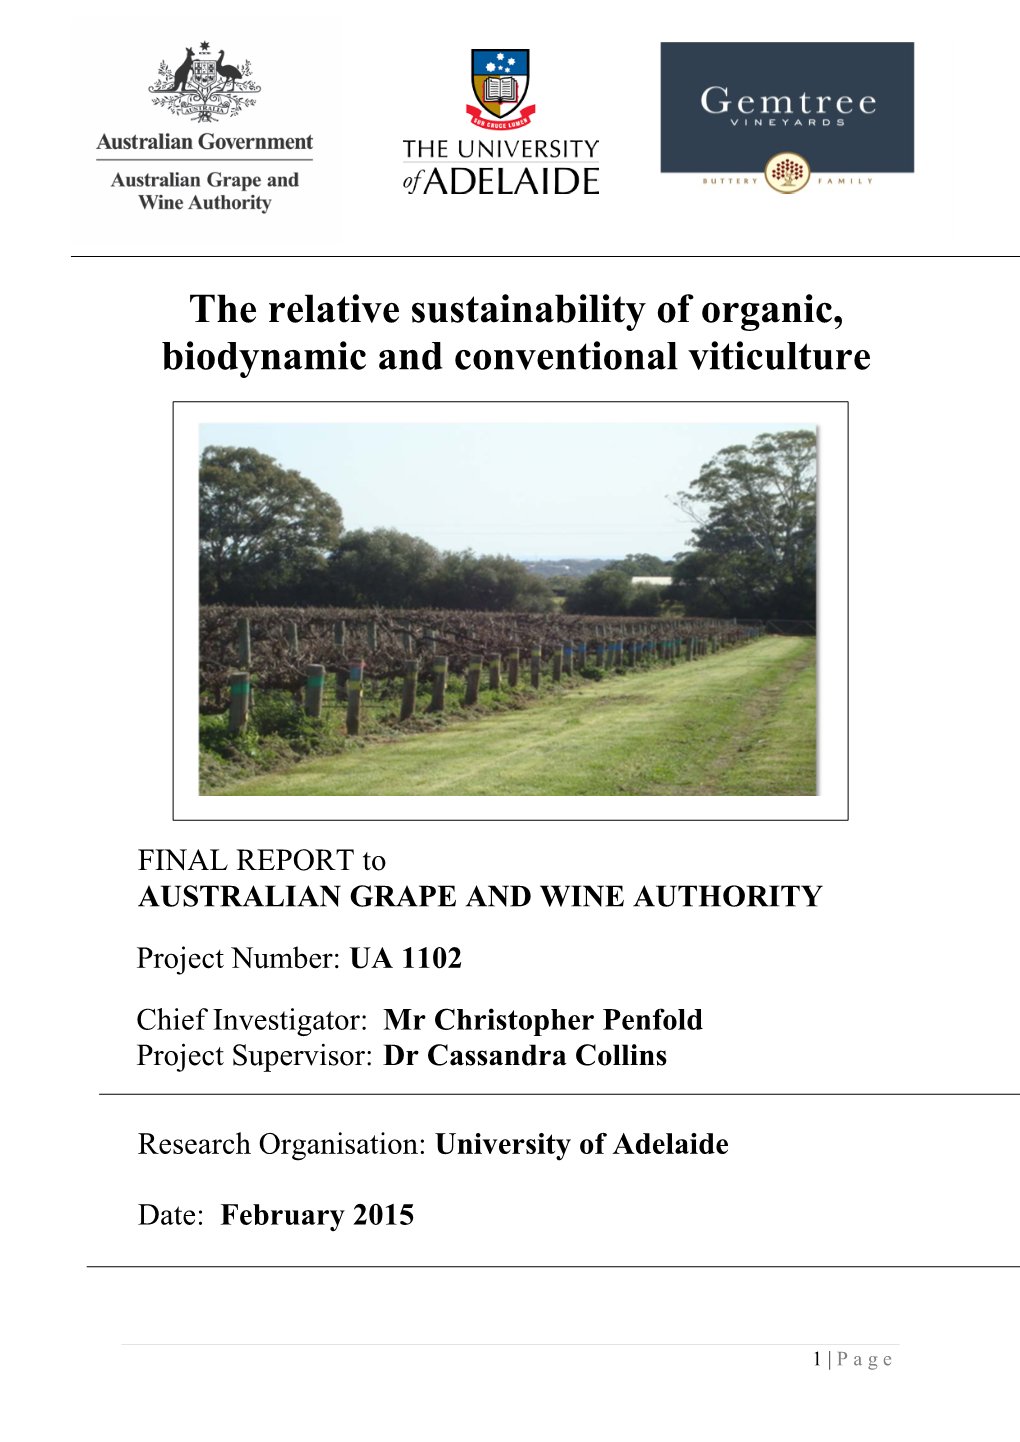 The Relative Sustainability of Organic, Biodynamic and Conventional Viticulture